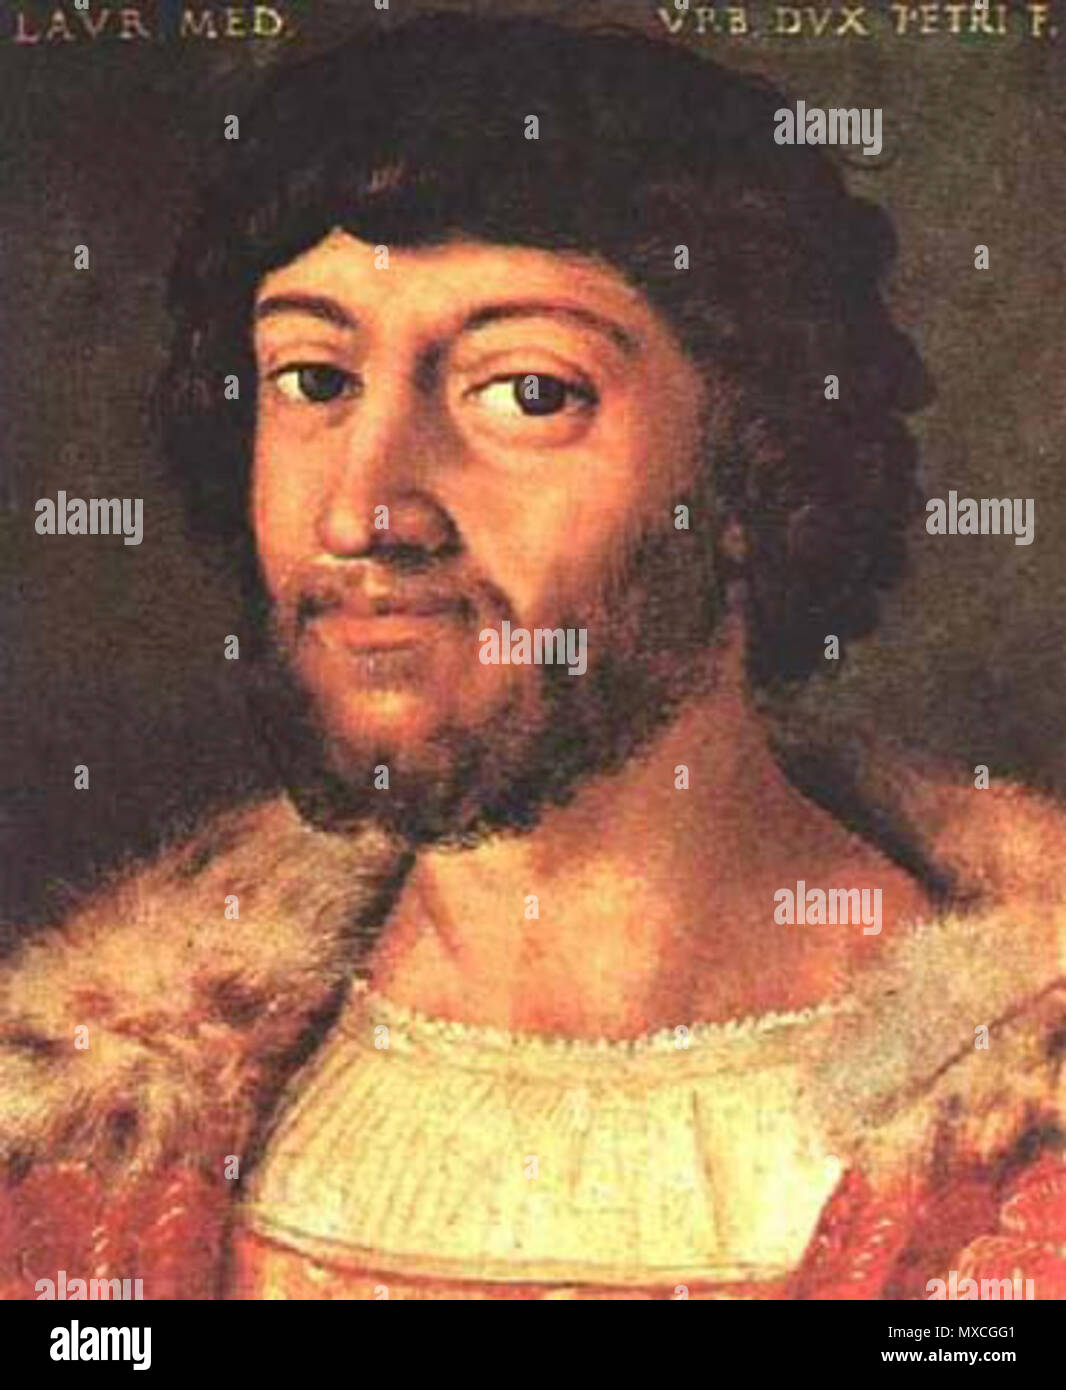 . Lorenzo di Piero de' Medici (September 12, 1492 – May 4, 1519) was the ruler of Florence from 1513 to his untimely death from syphilis in 1519. He was also Duke of Urbino for a short while. Niccolò Machiavelli's The Prince was dedicated to him, as a young ruler who might unite all Italy by expelling the foreign occupiers. 16th century . 28 August 2007. Unknown 377 Lorenzo Second Medici Stock Photo